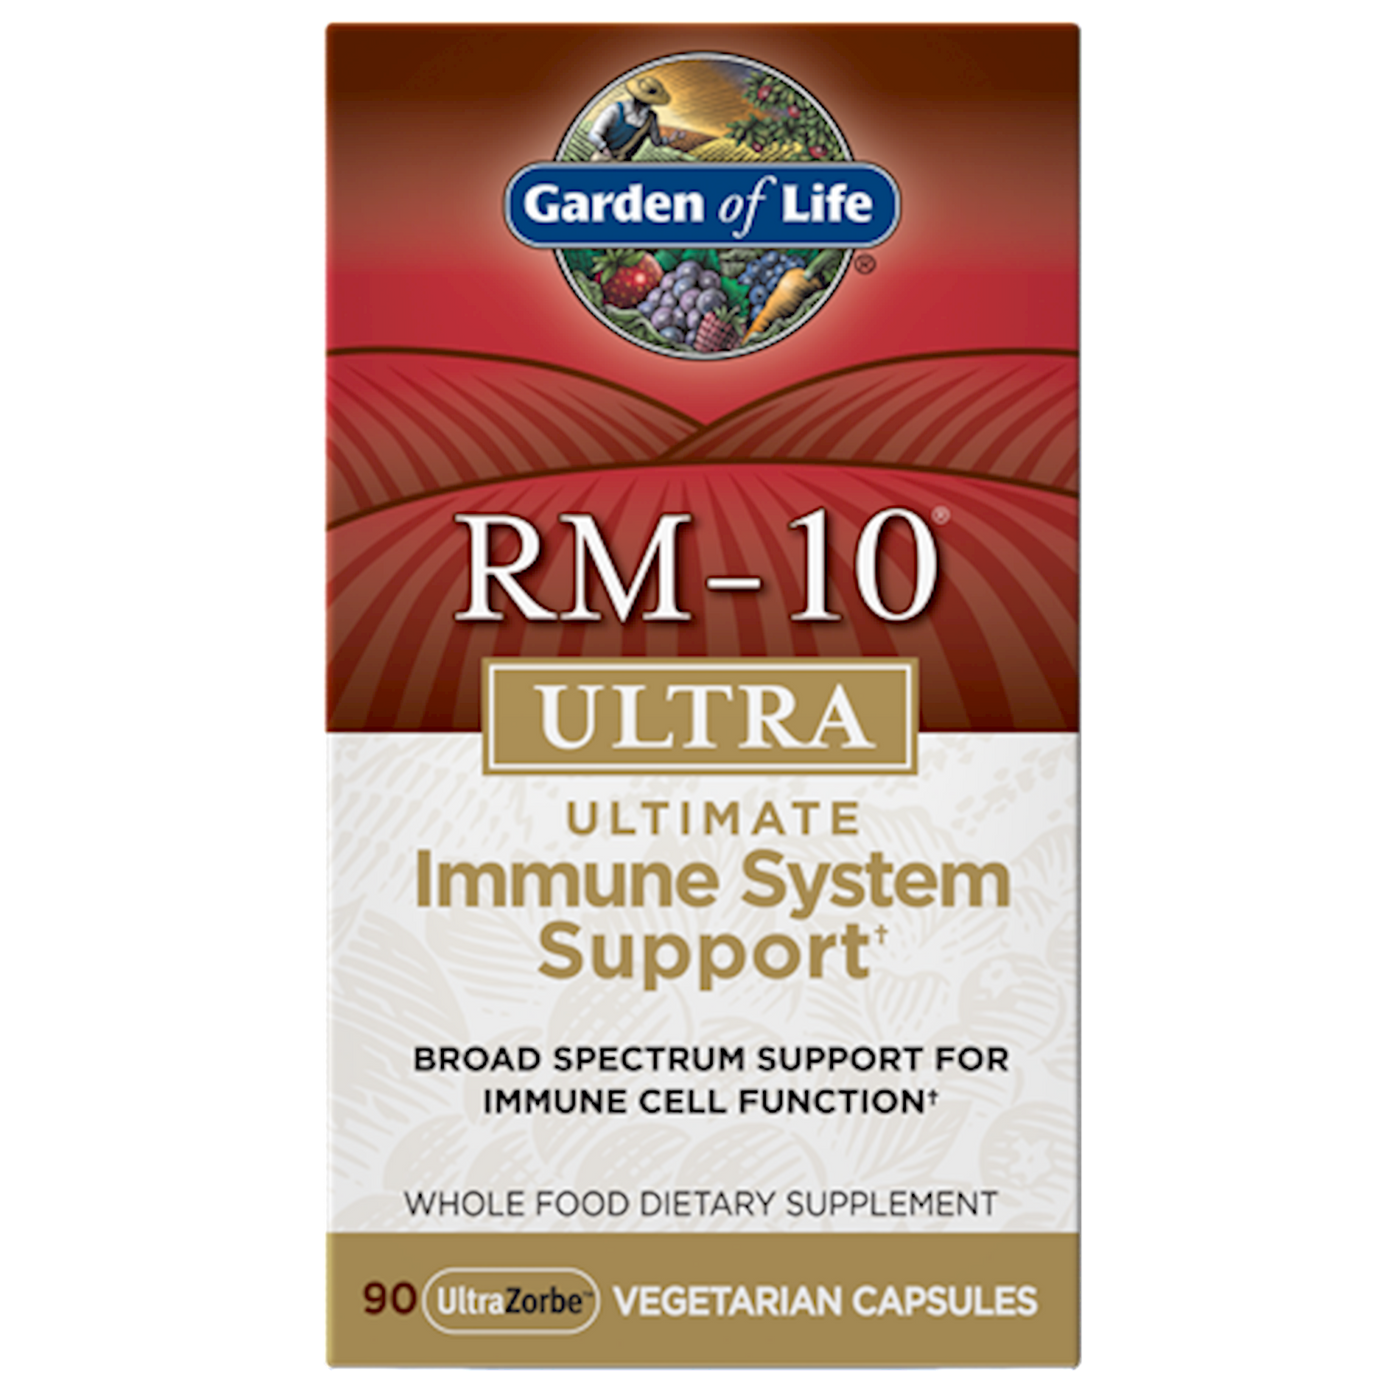 RM-10 Ultra  Curated Wellness